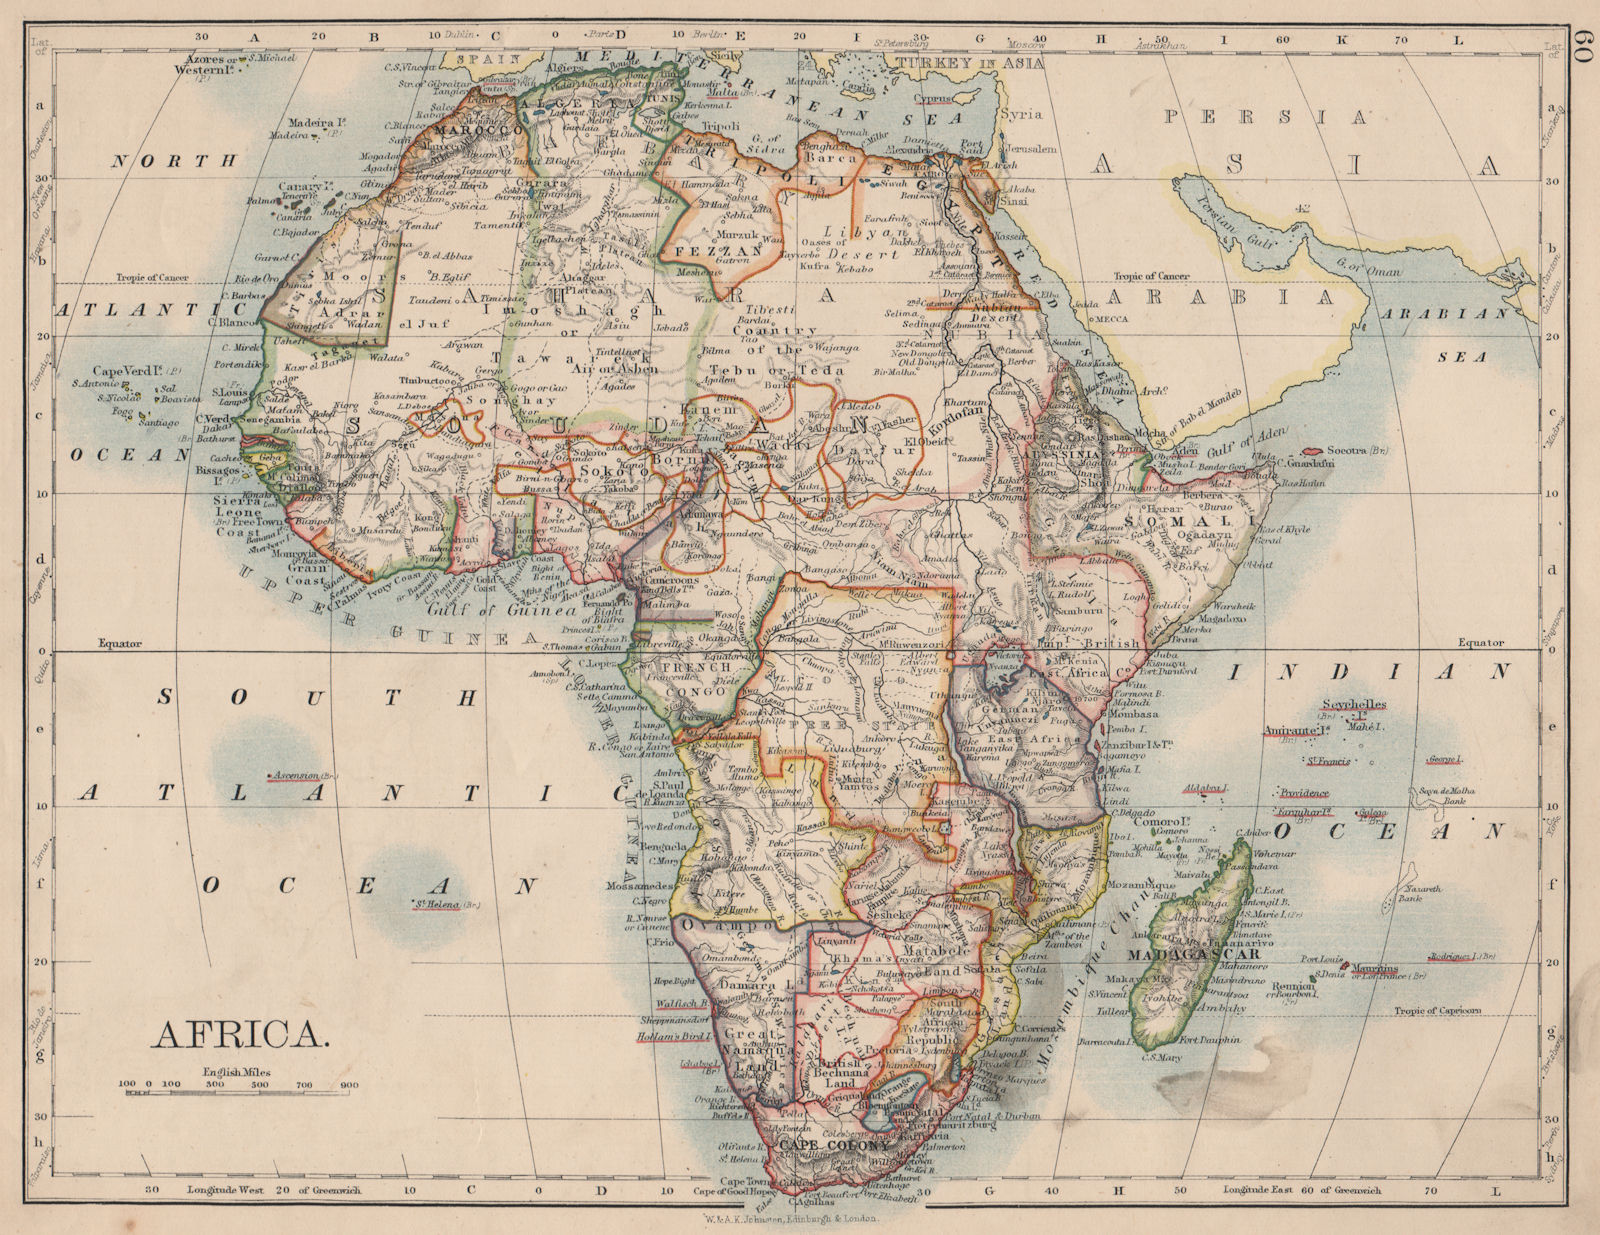 COLONIAL AFRICA. British East/Central/South Africa. Bechuanaland  1895 old map